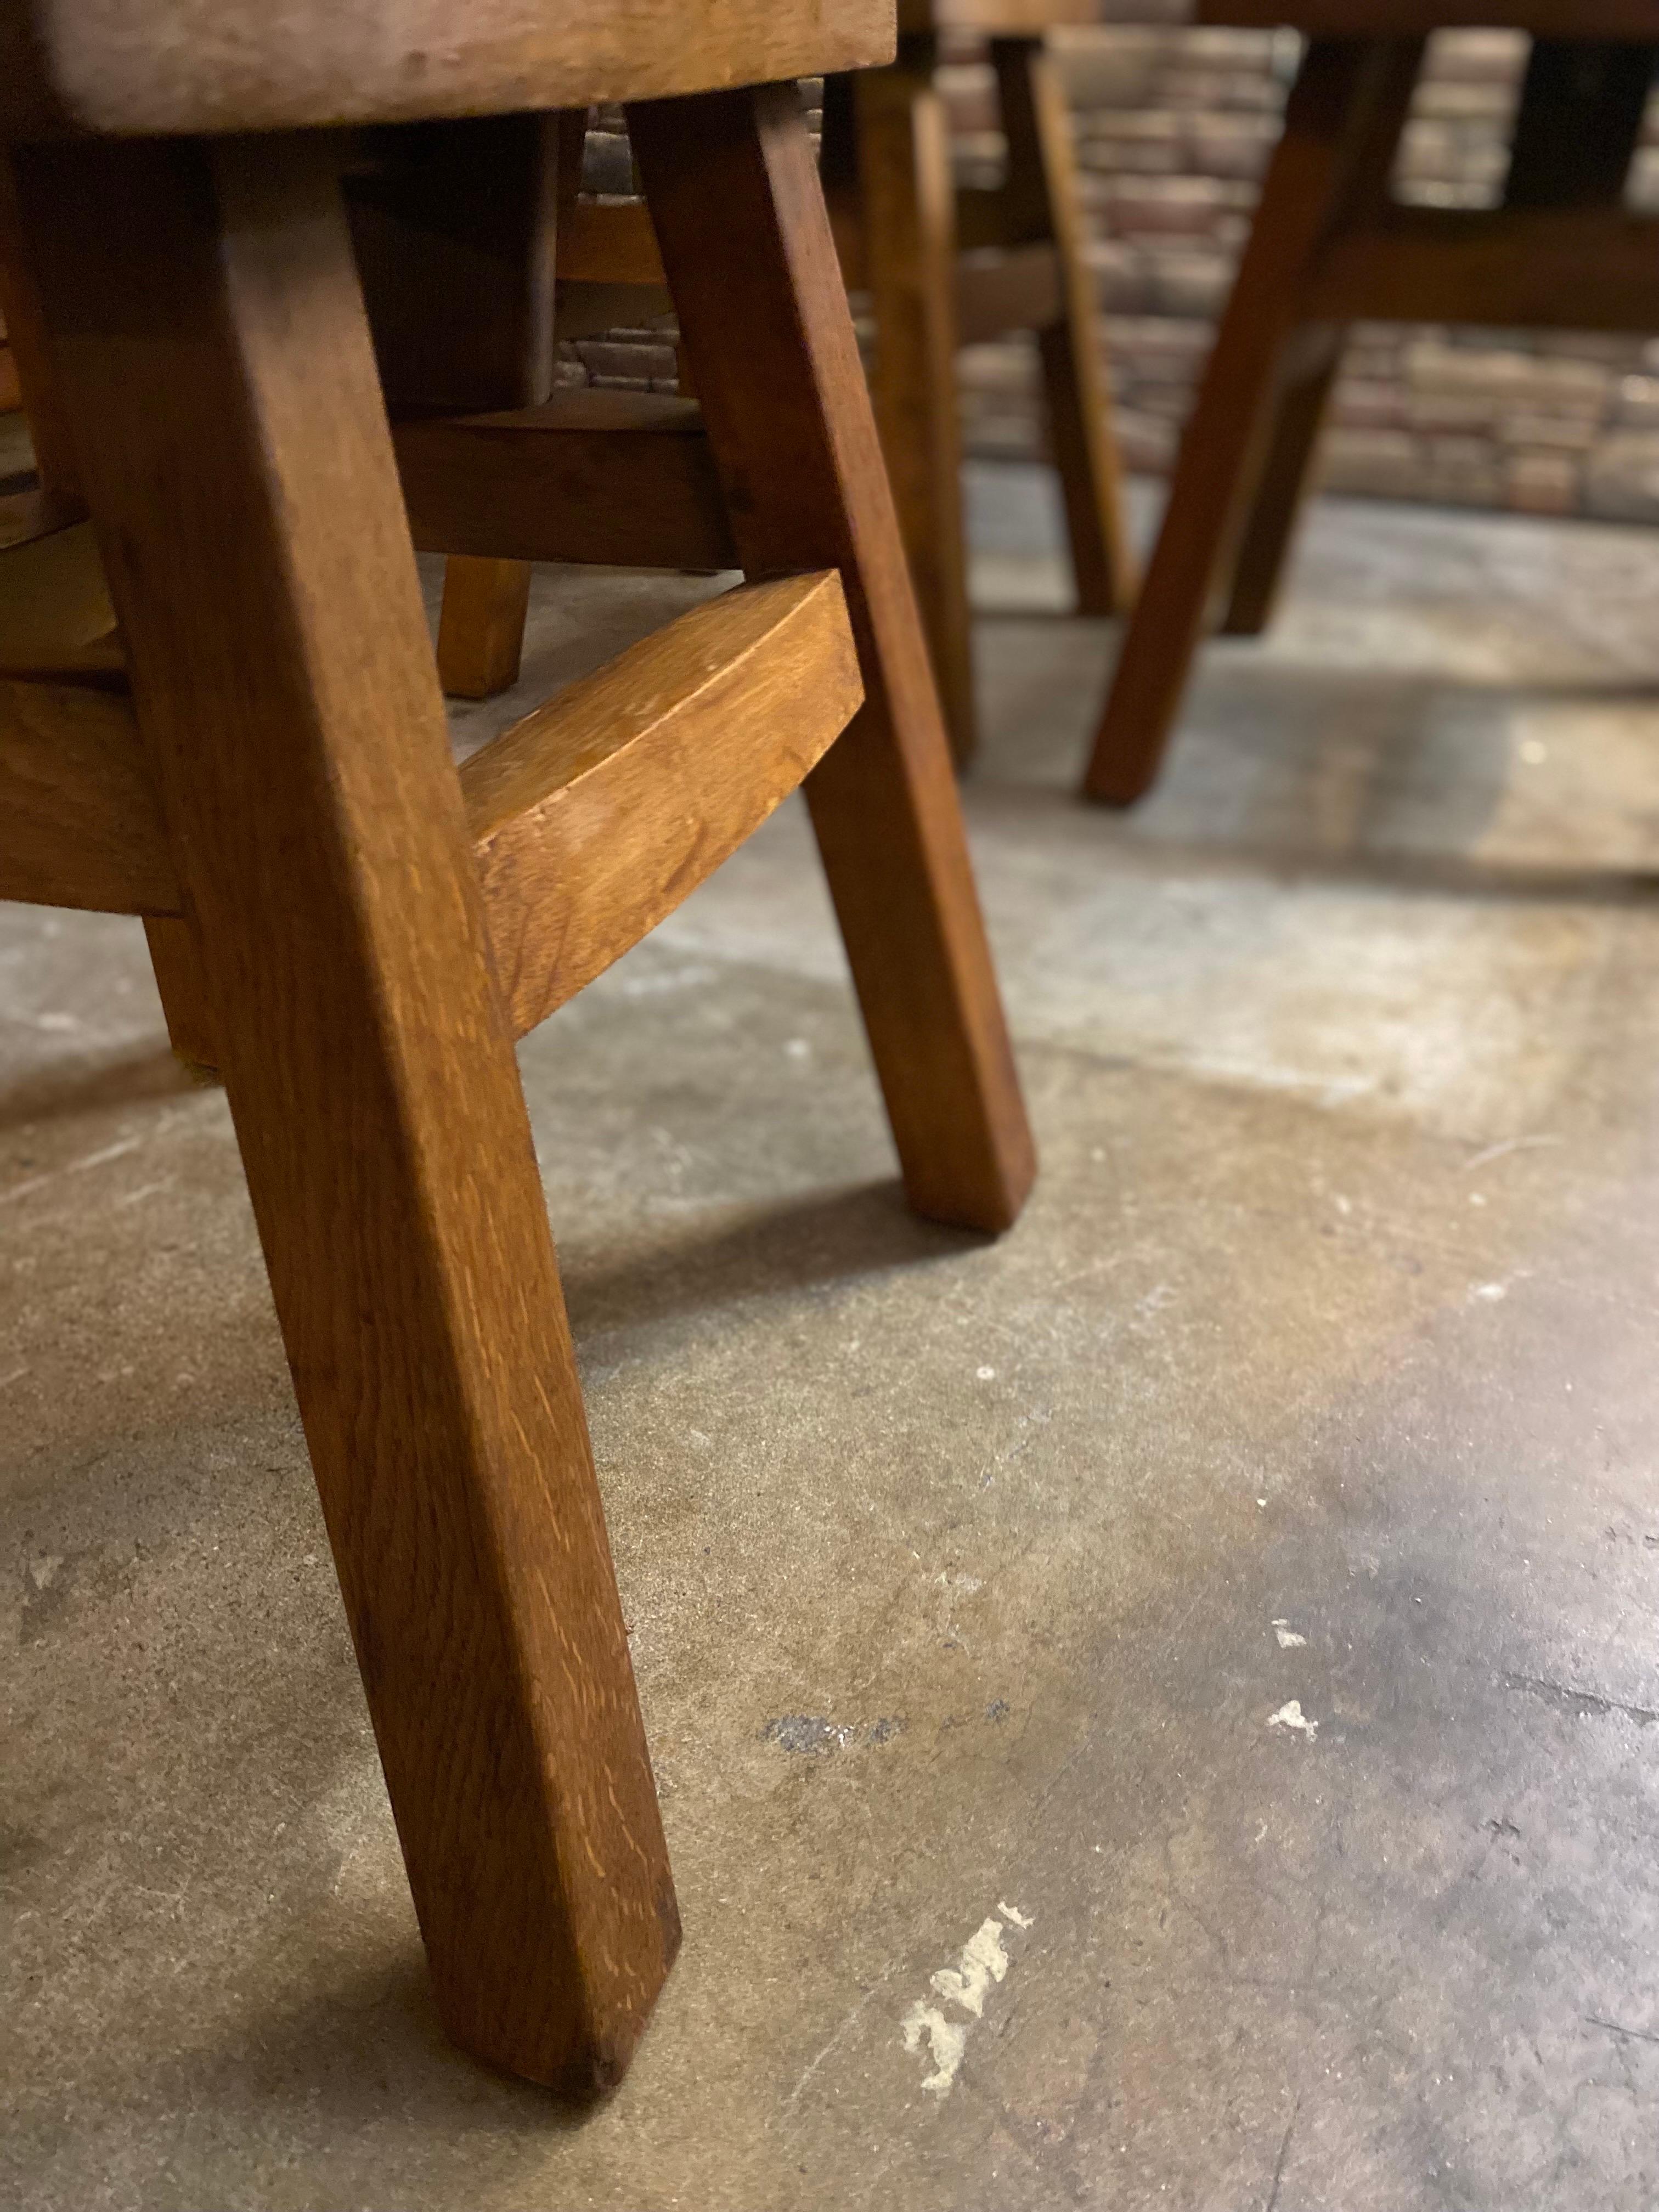 Set of 4 Brutalist Oak Dining Chairs, Netherlands, Circa 1970s For Sale 5